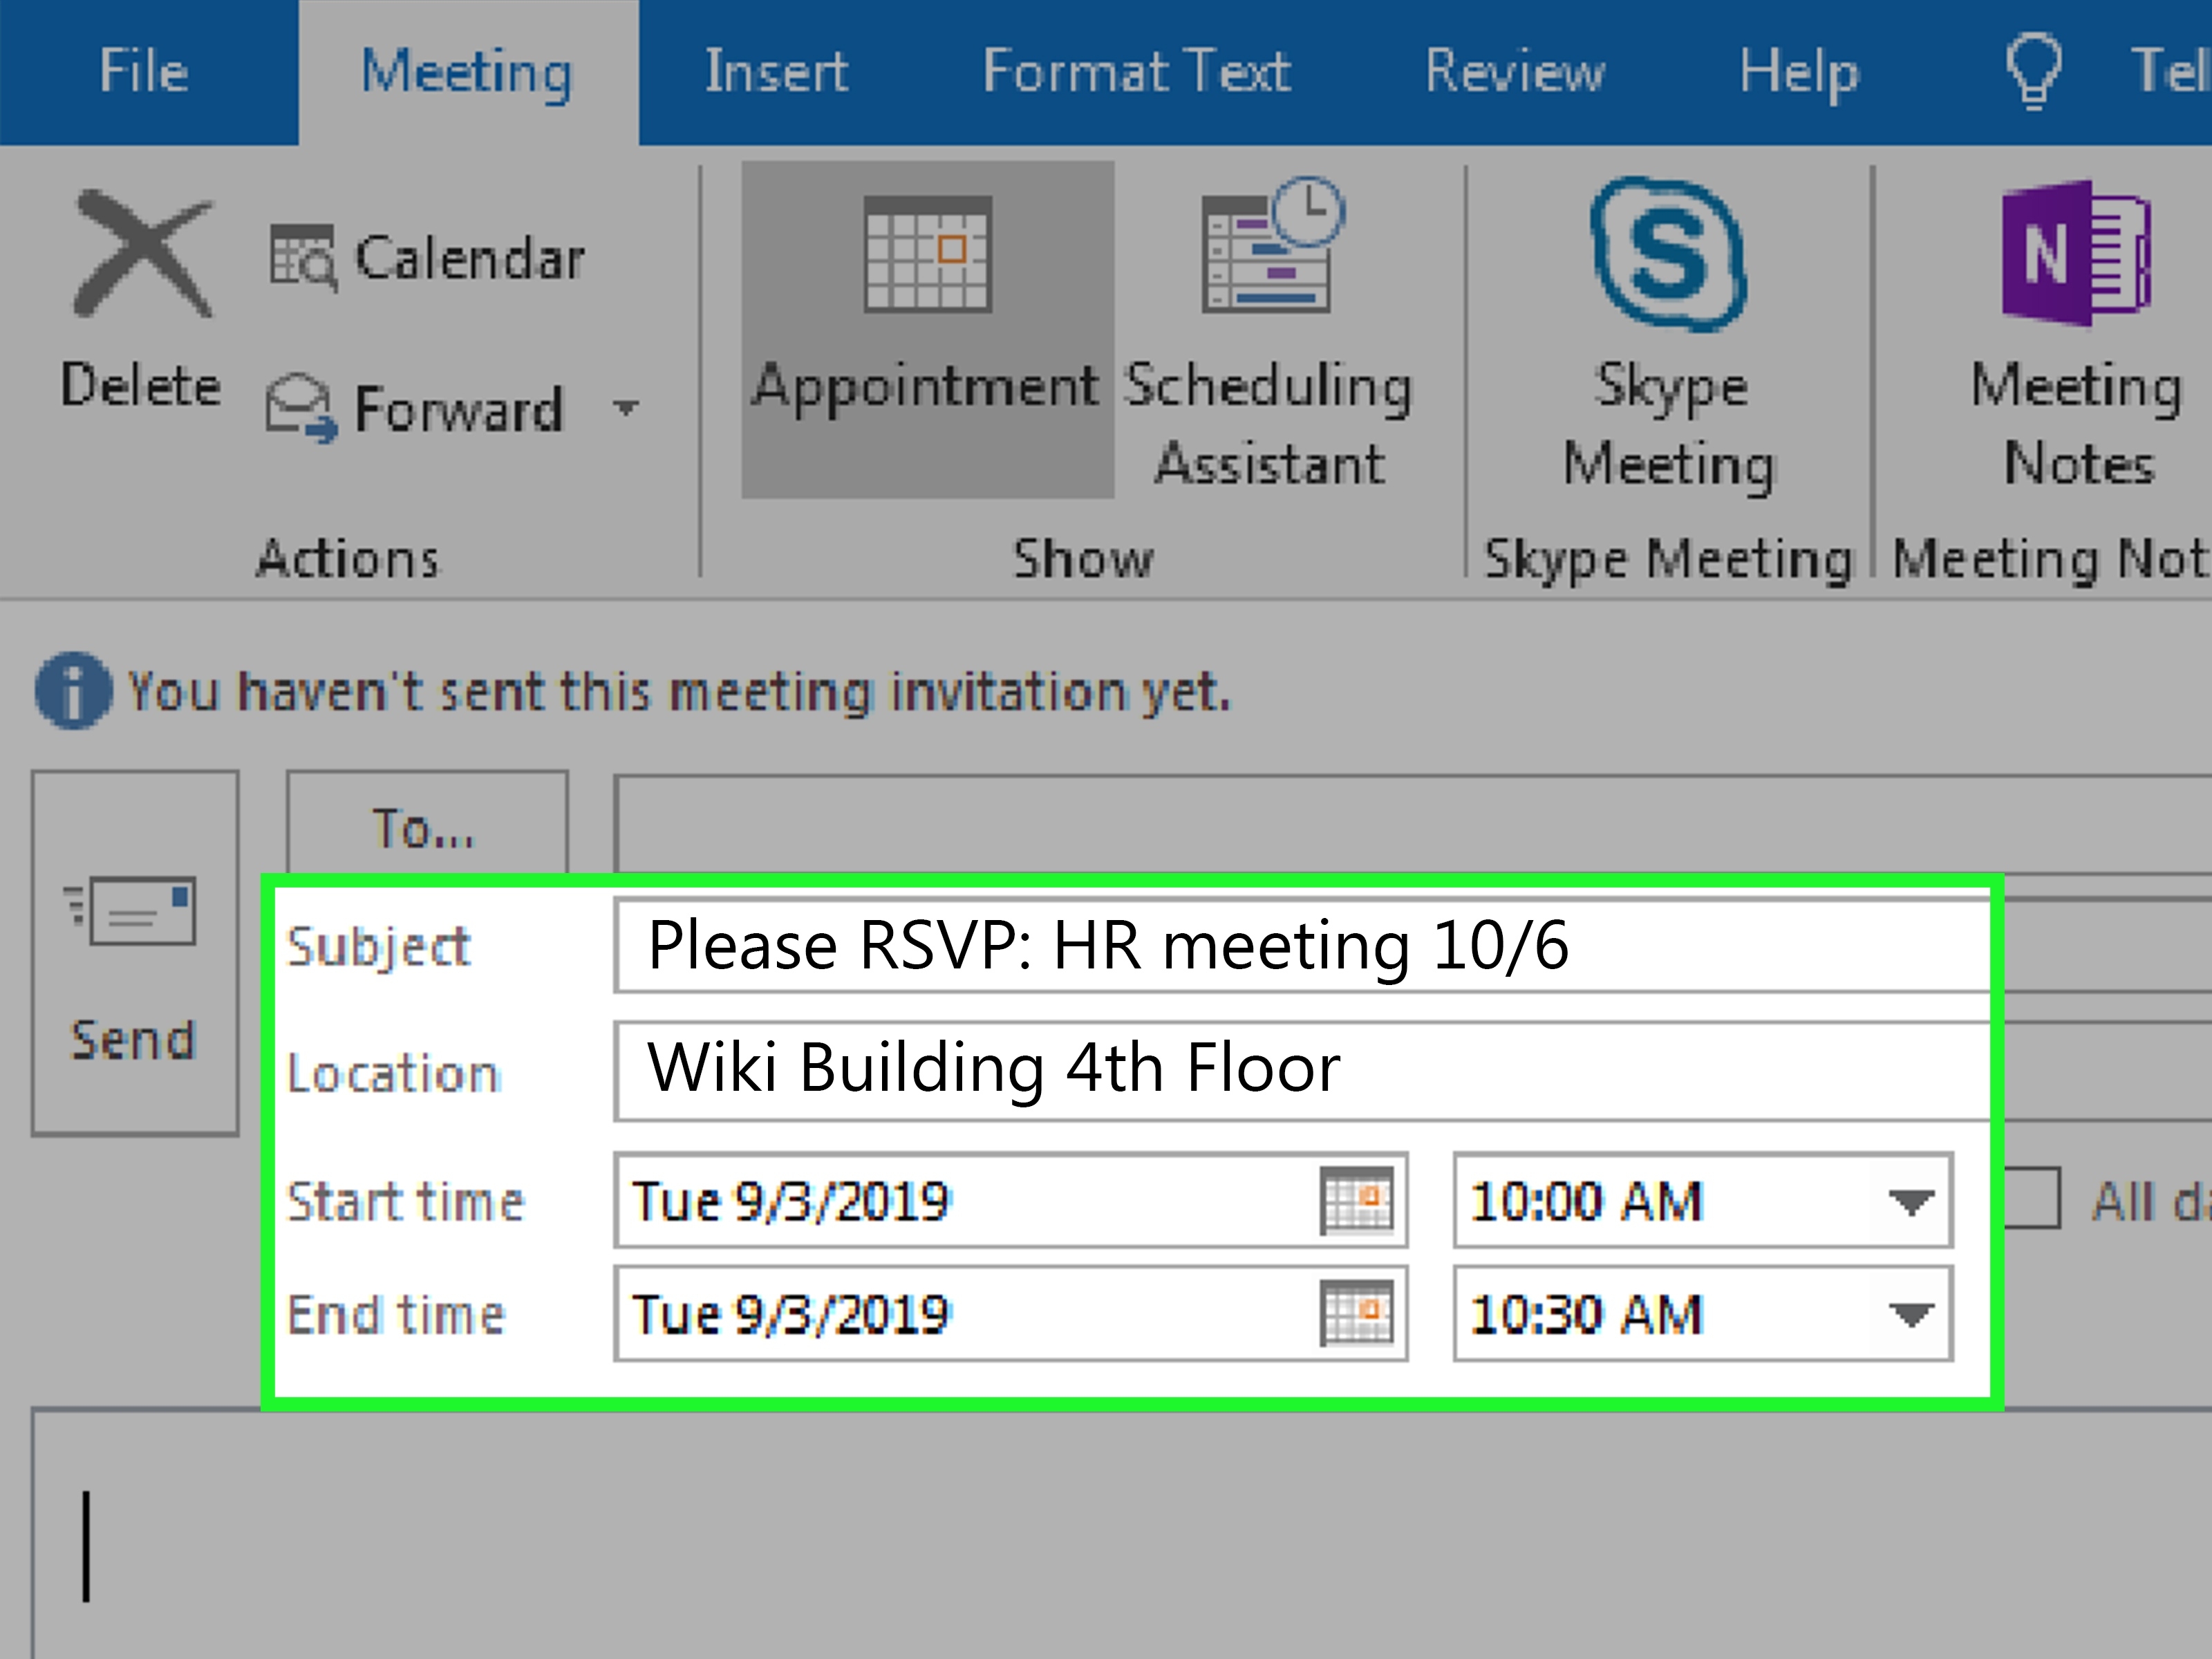 3 Ways To Write An Email For A Meeting Invitation - Wikihow Calendar Meeting Request Template